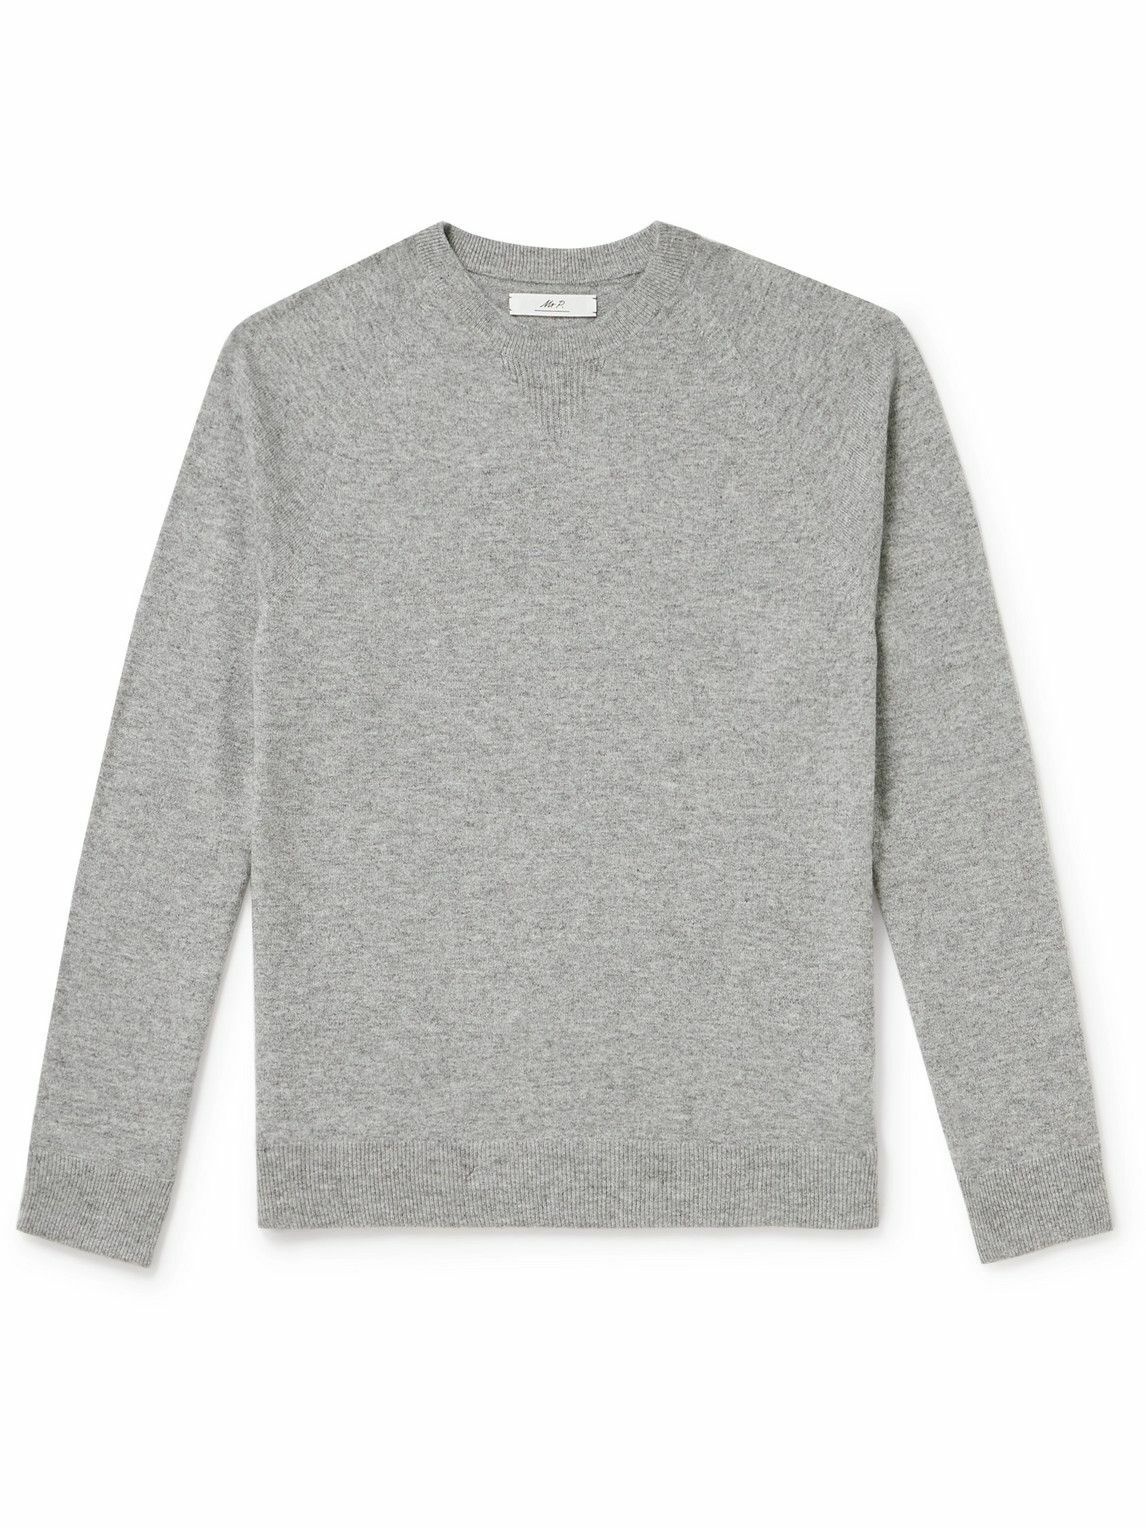 Photo: Mr P. - Wool and Cashmere-Blend Sweater - Gray